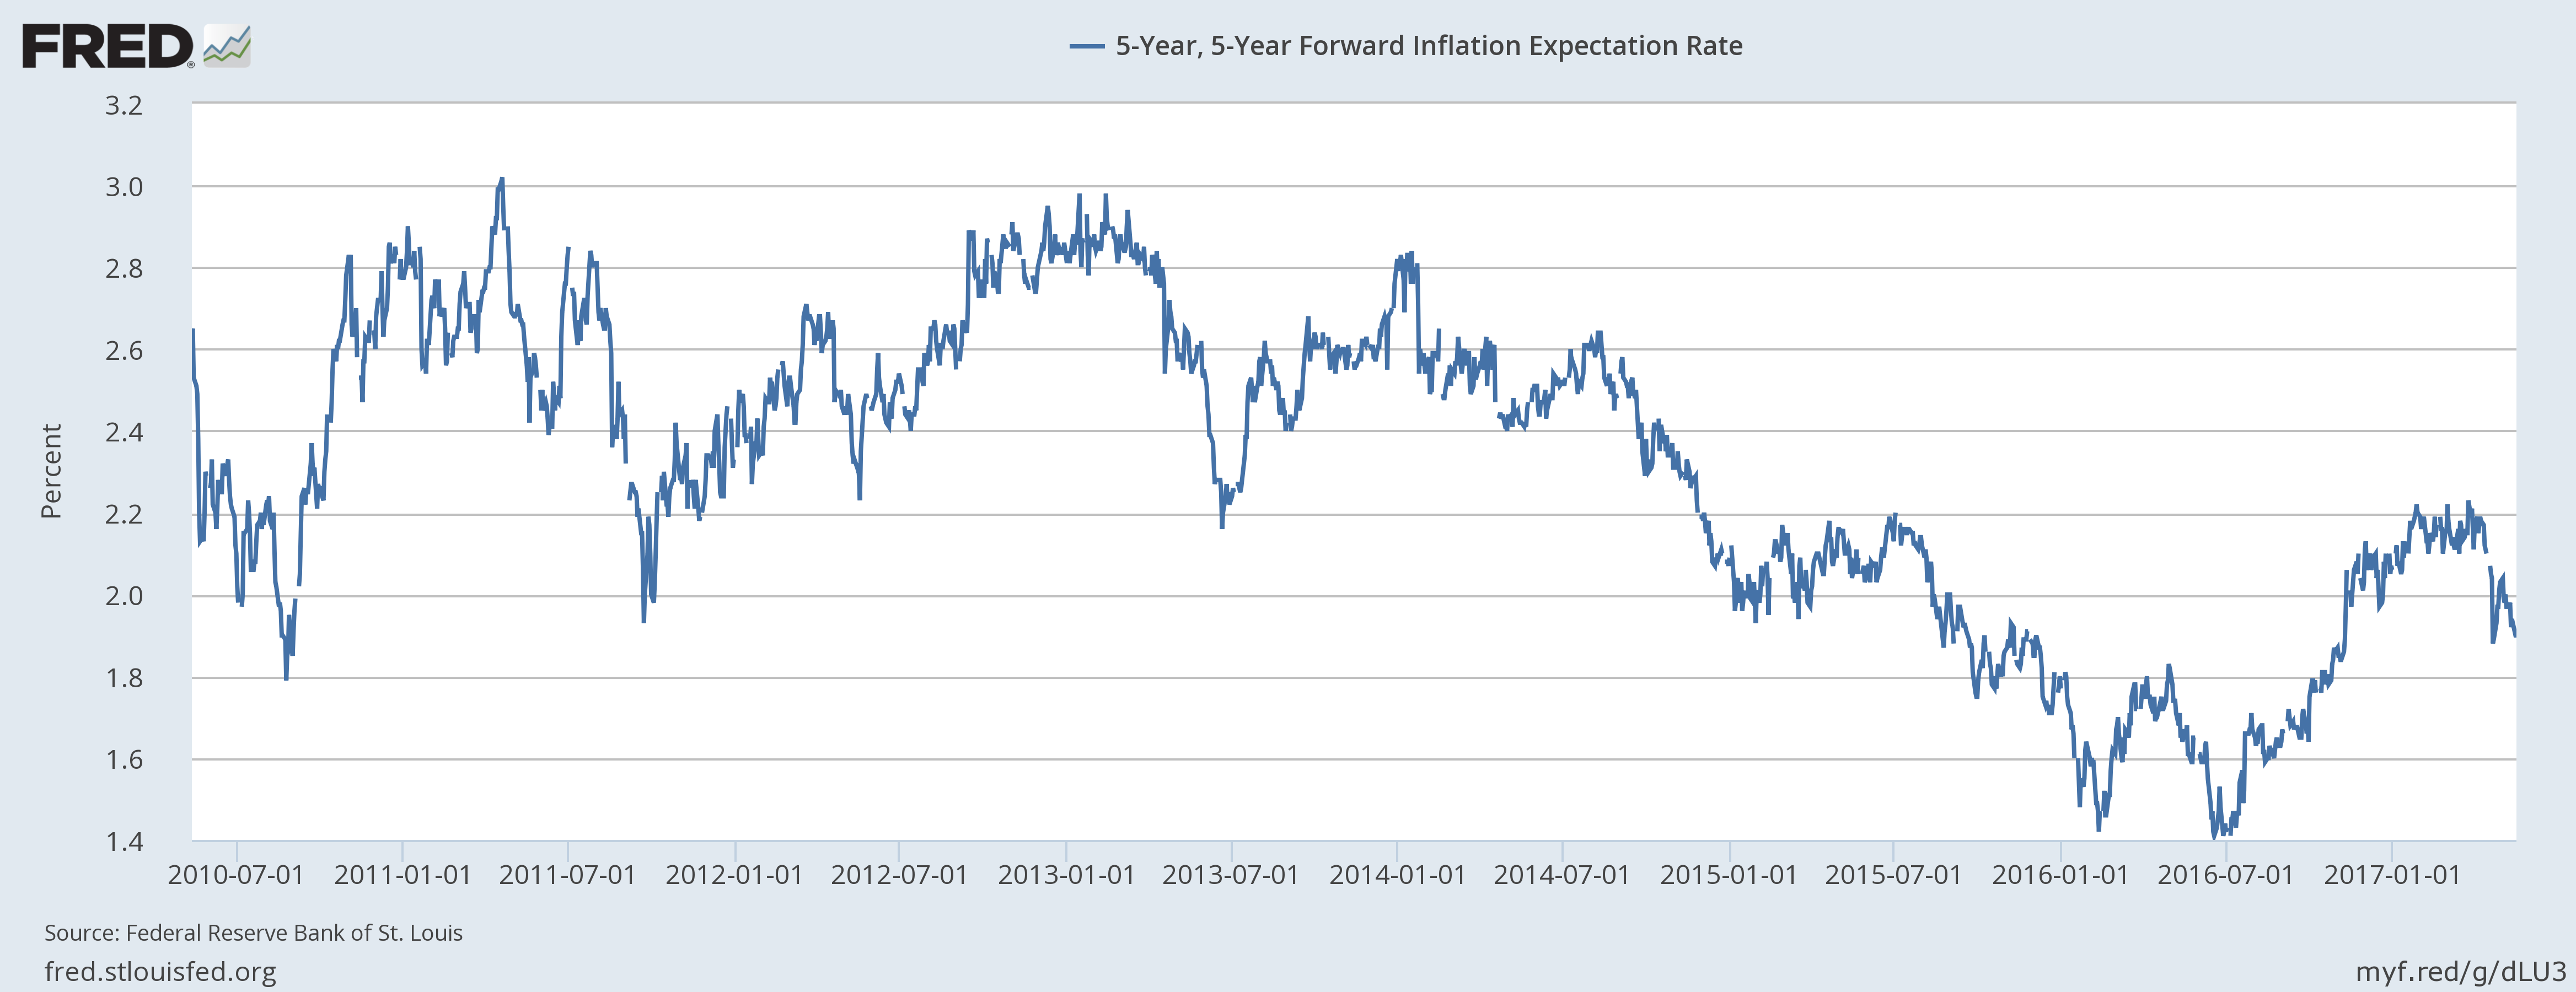 Five Year Forward Inflation Expectation Rate, July 2010 - May 2017